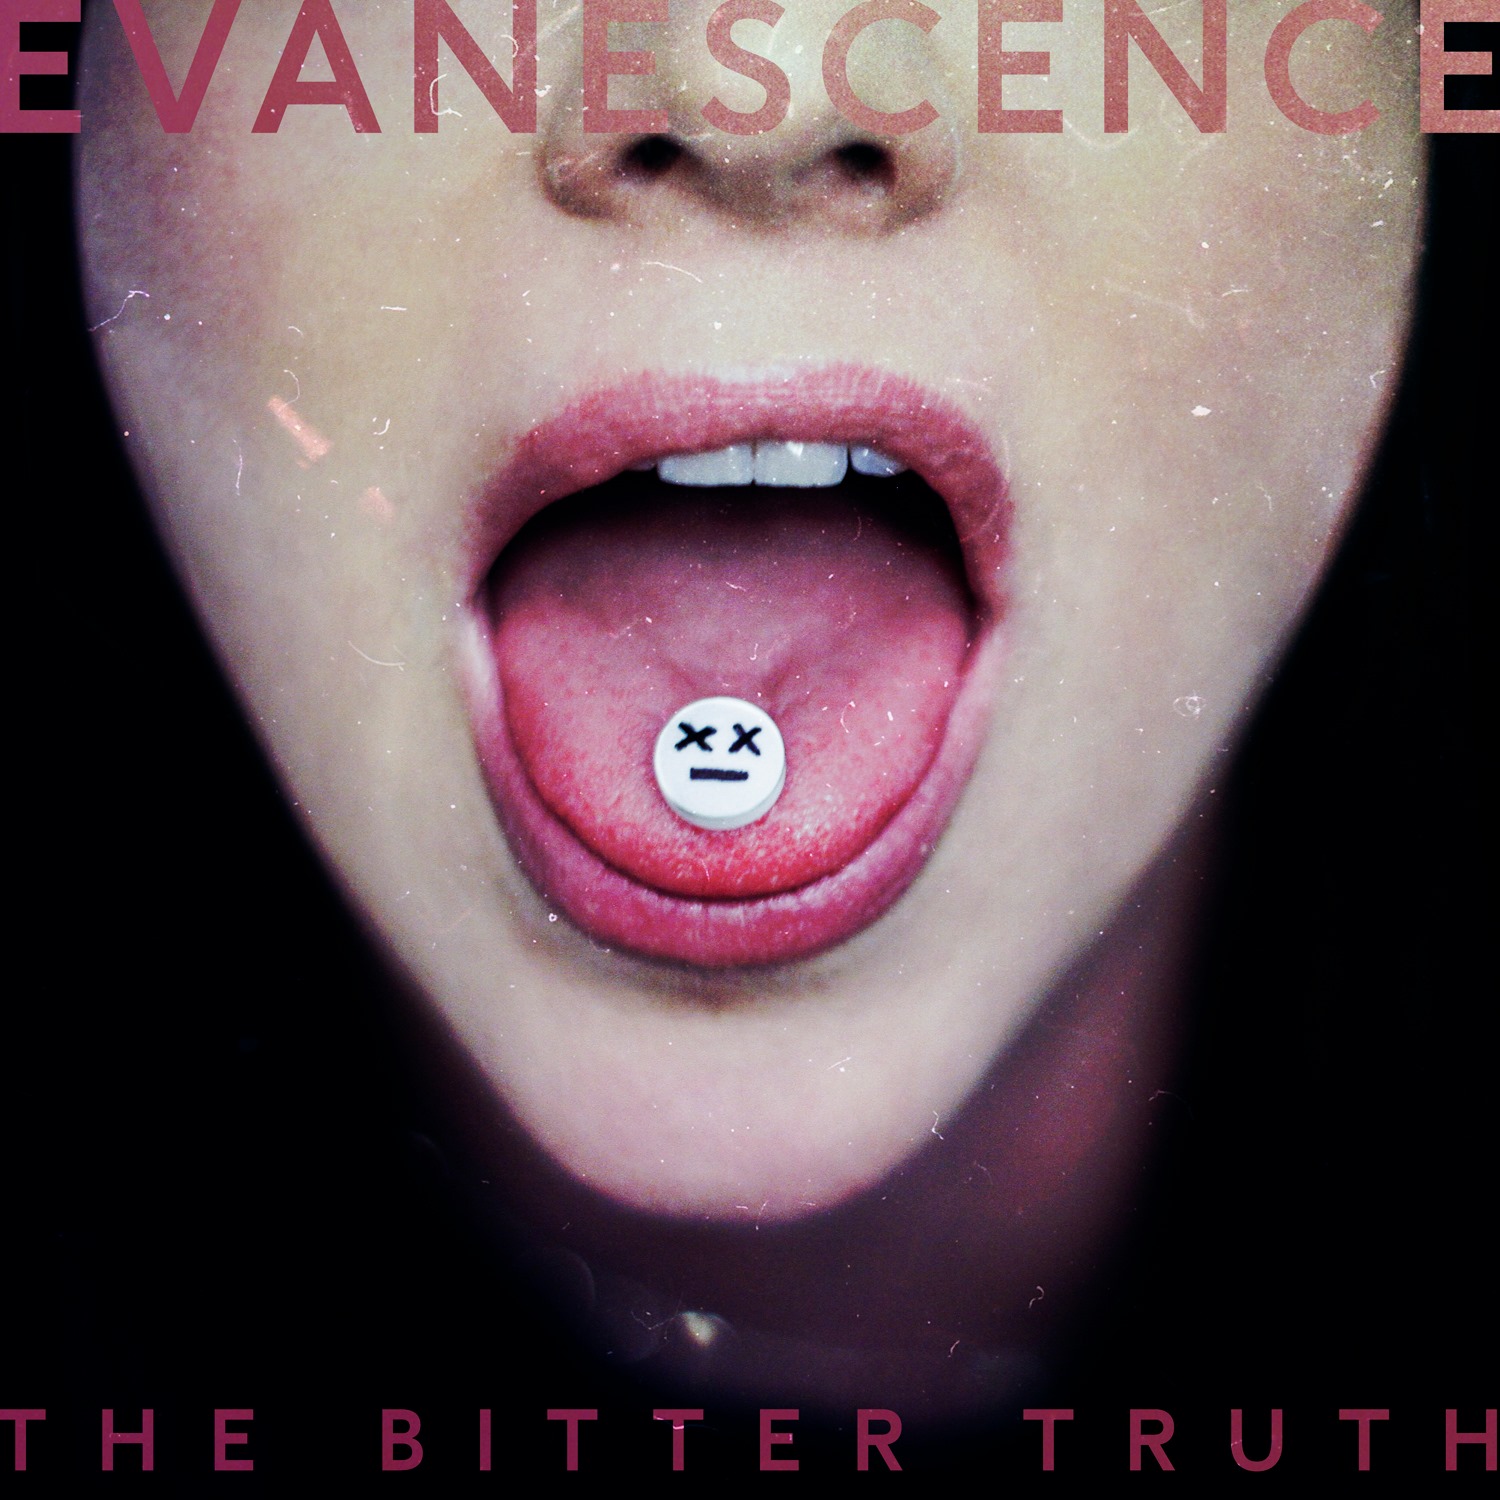 Evanescence to Release New Single "Better Without You" this Friday, March 5th